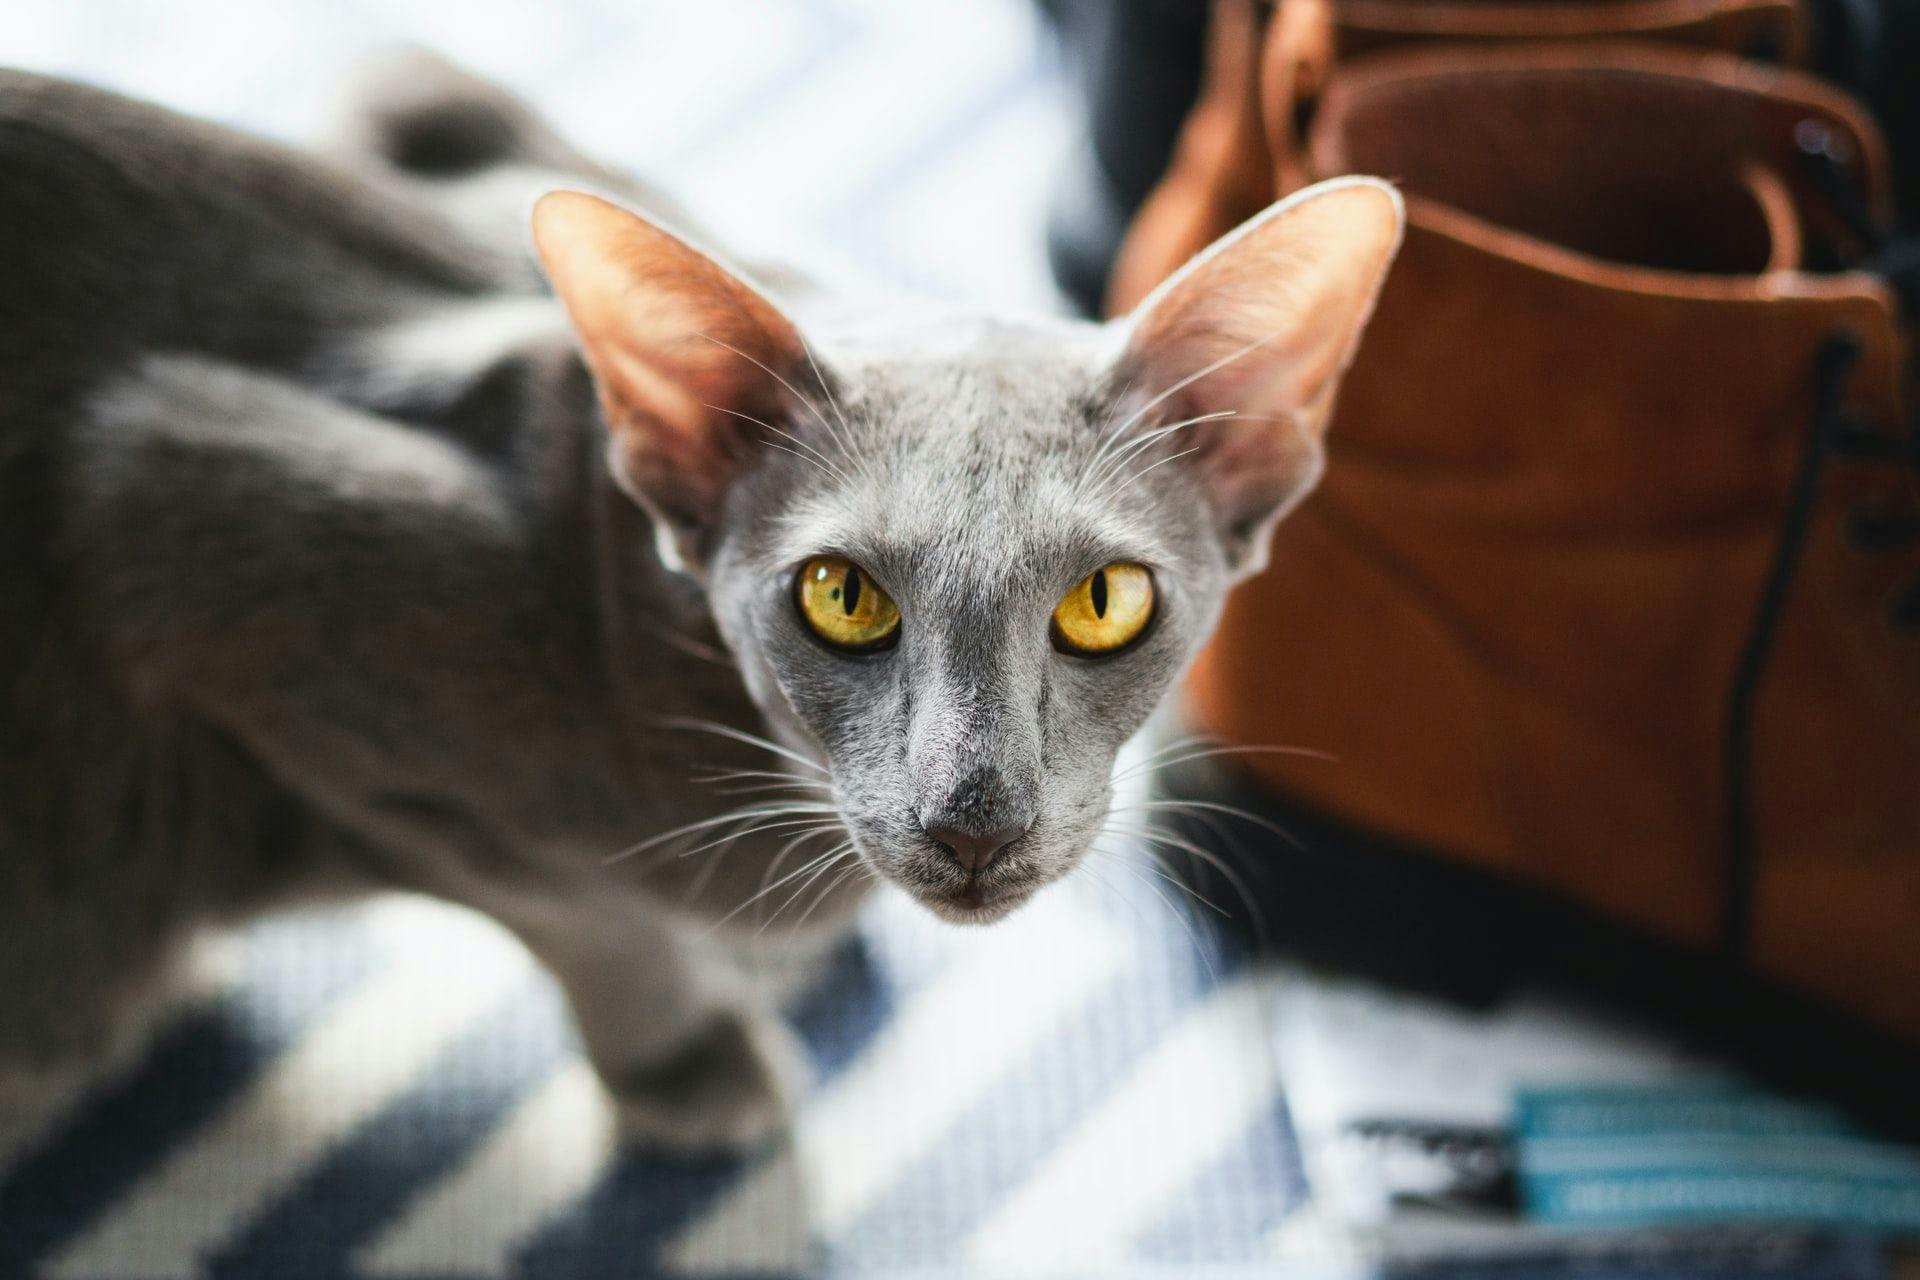 Oriental Shorthair with grey fur and yellow eyes.